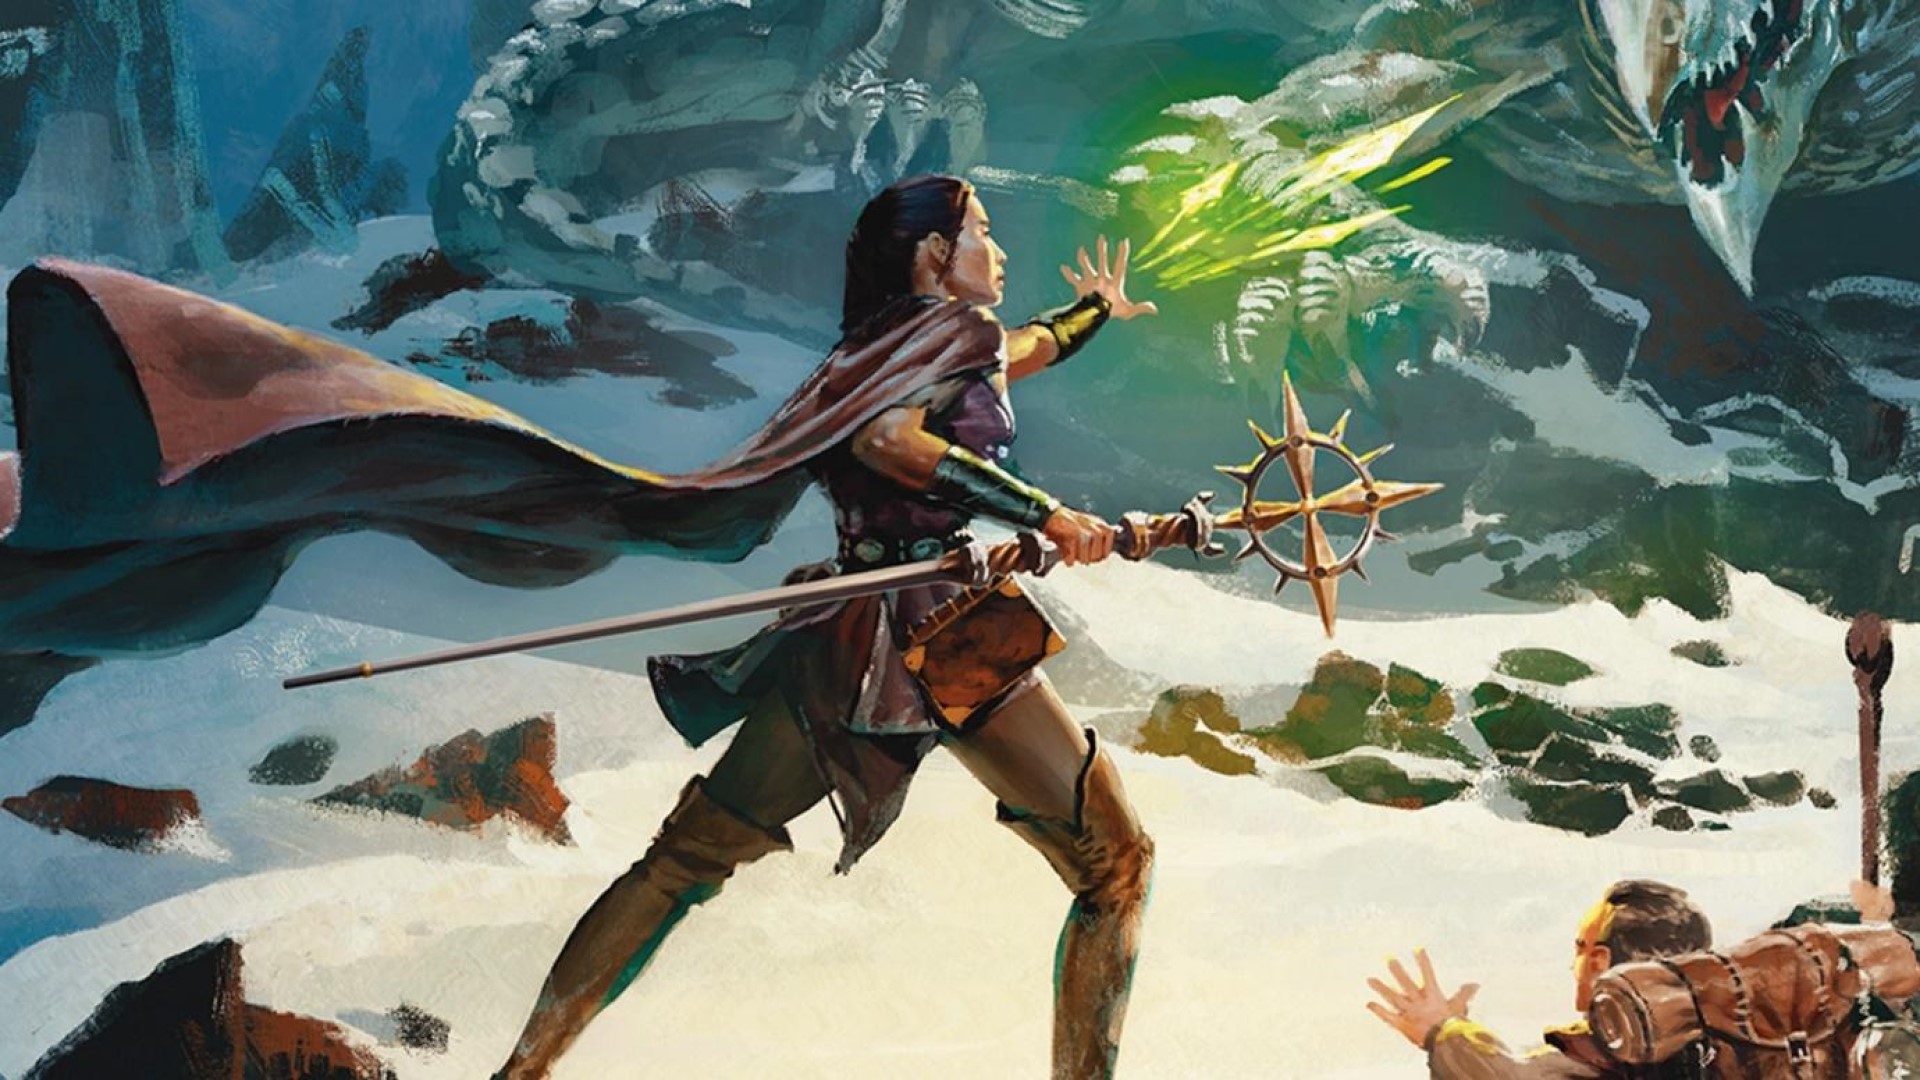 Dungeons & Dragons 5E wizard class explained